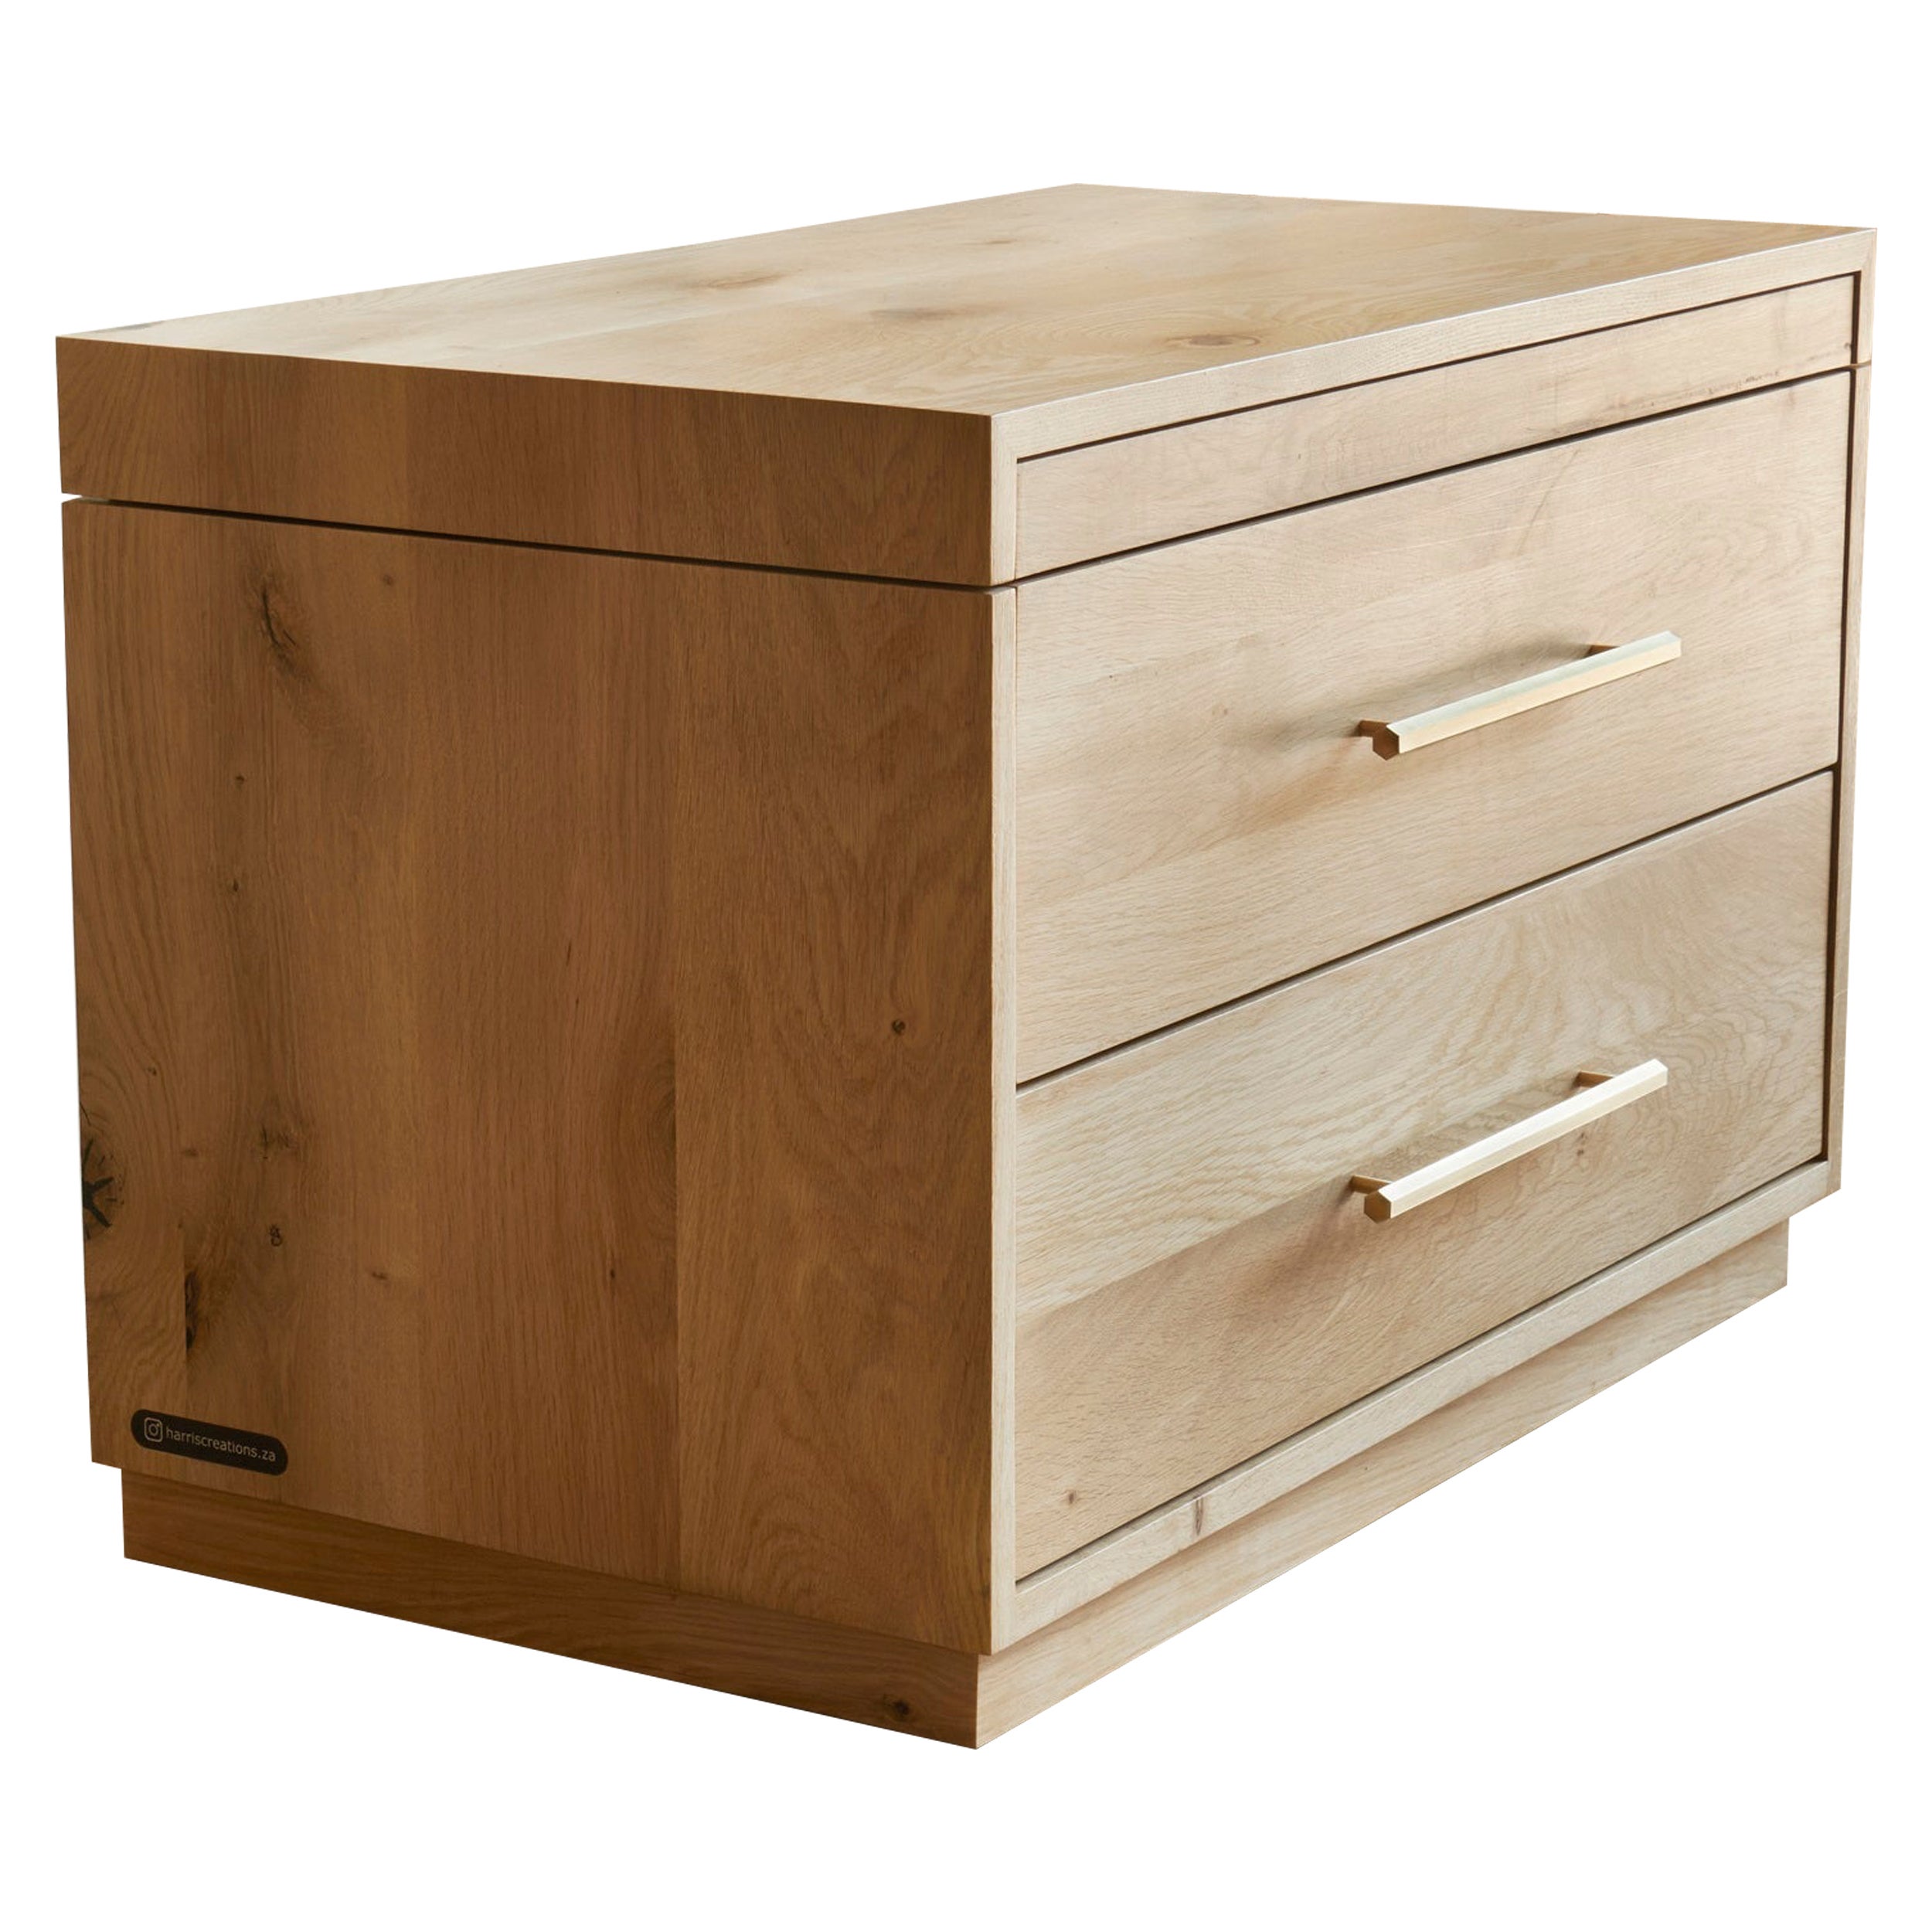  MAXWELL - Multifunctional Pedestals/Bedside Tables  For Sale